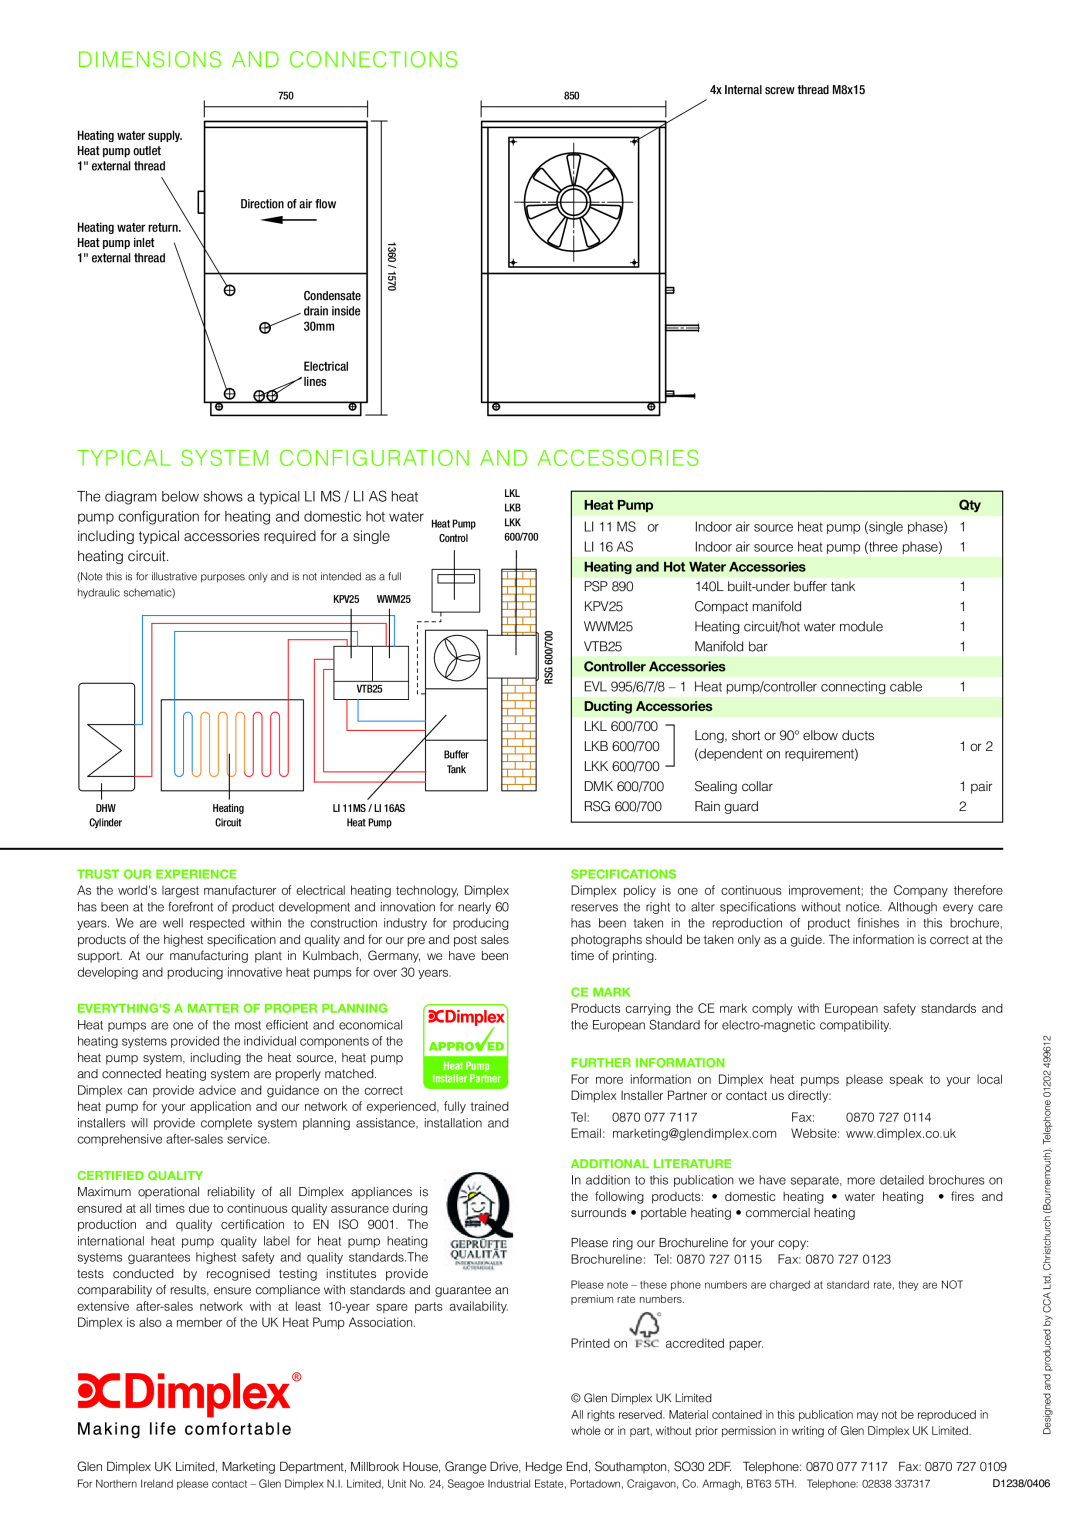 Dimplex LI AS Dimensions And Connections, Typical System Configuration And Accessories, Heat Pump, Controller Accessories 